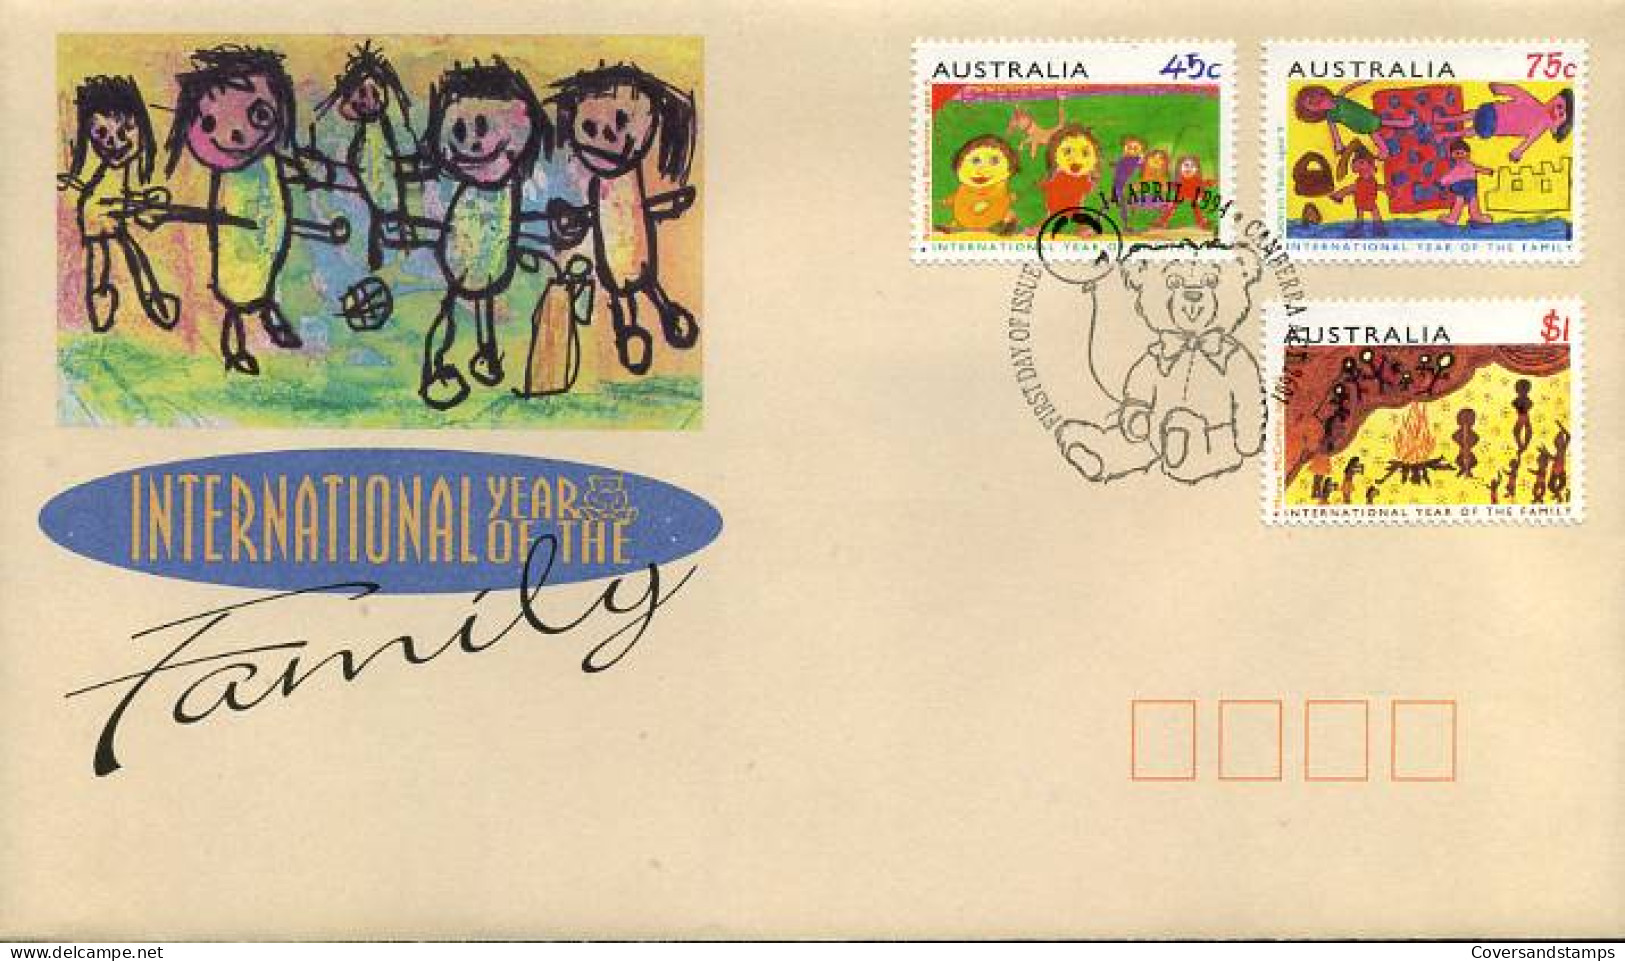 Australië  - FDC -  International Year Of The Family                                    - Premiers Jours (FDC)